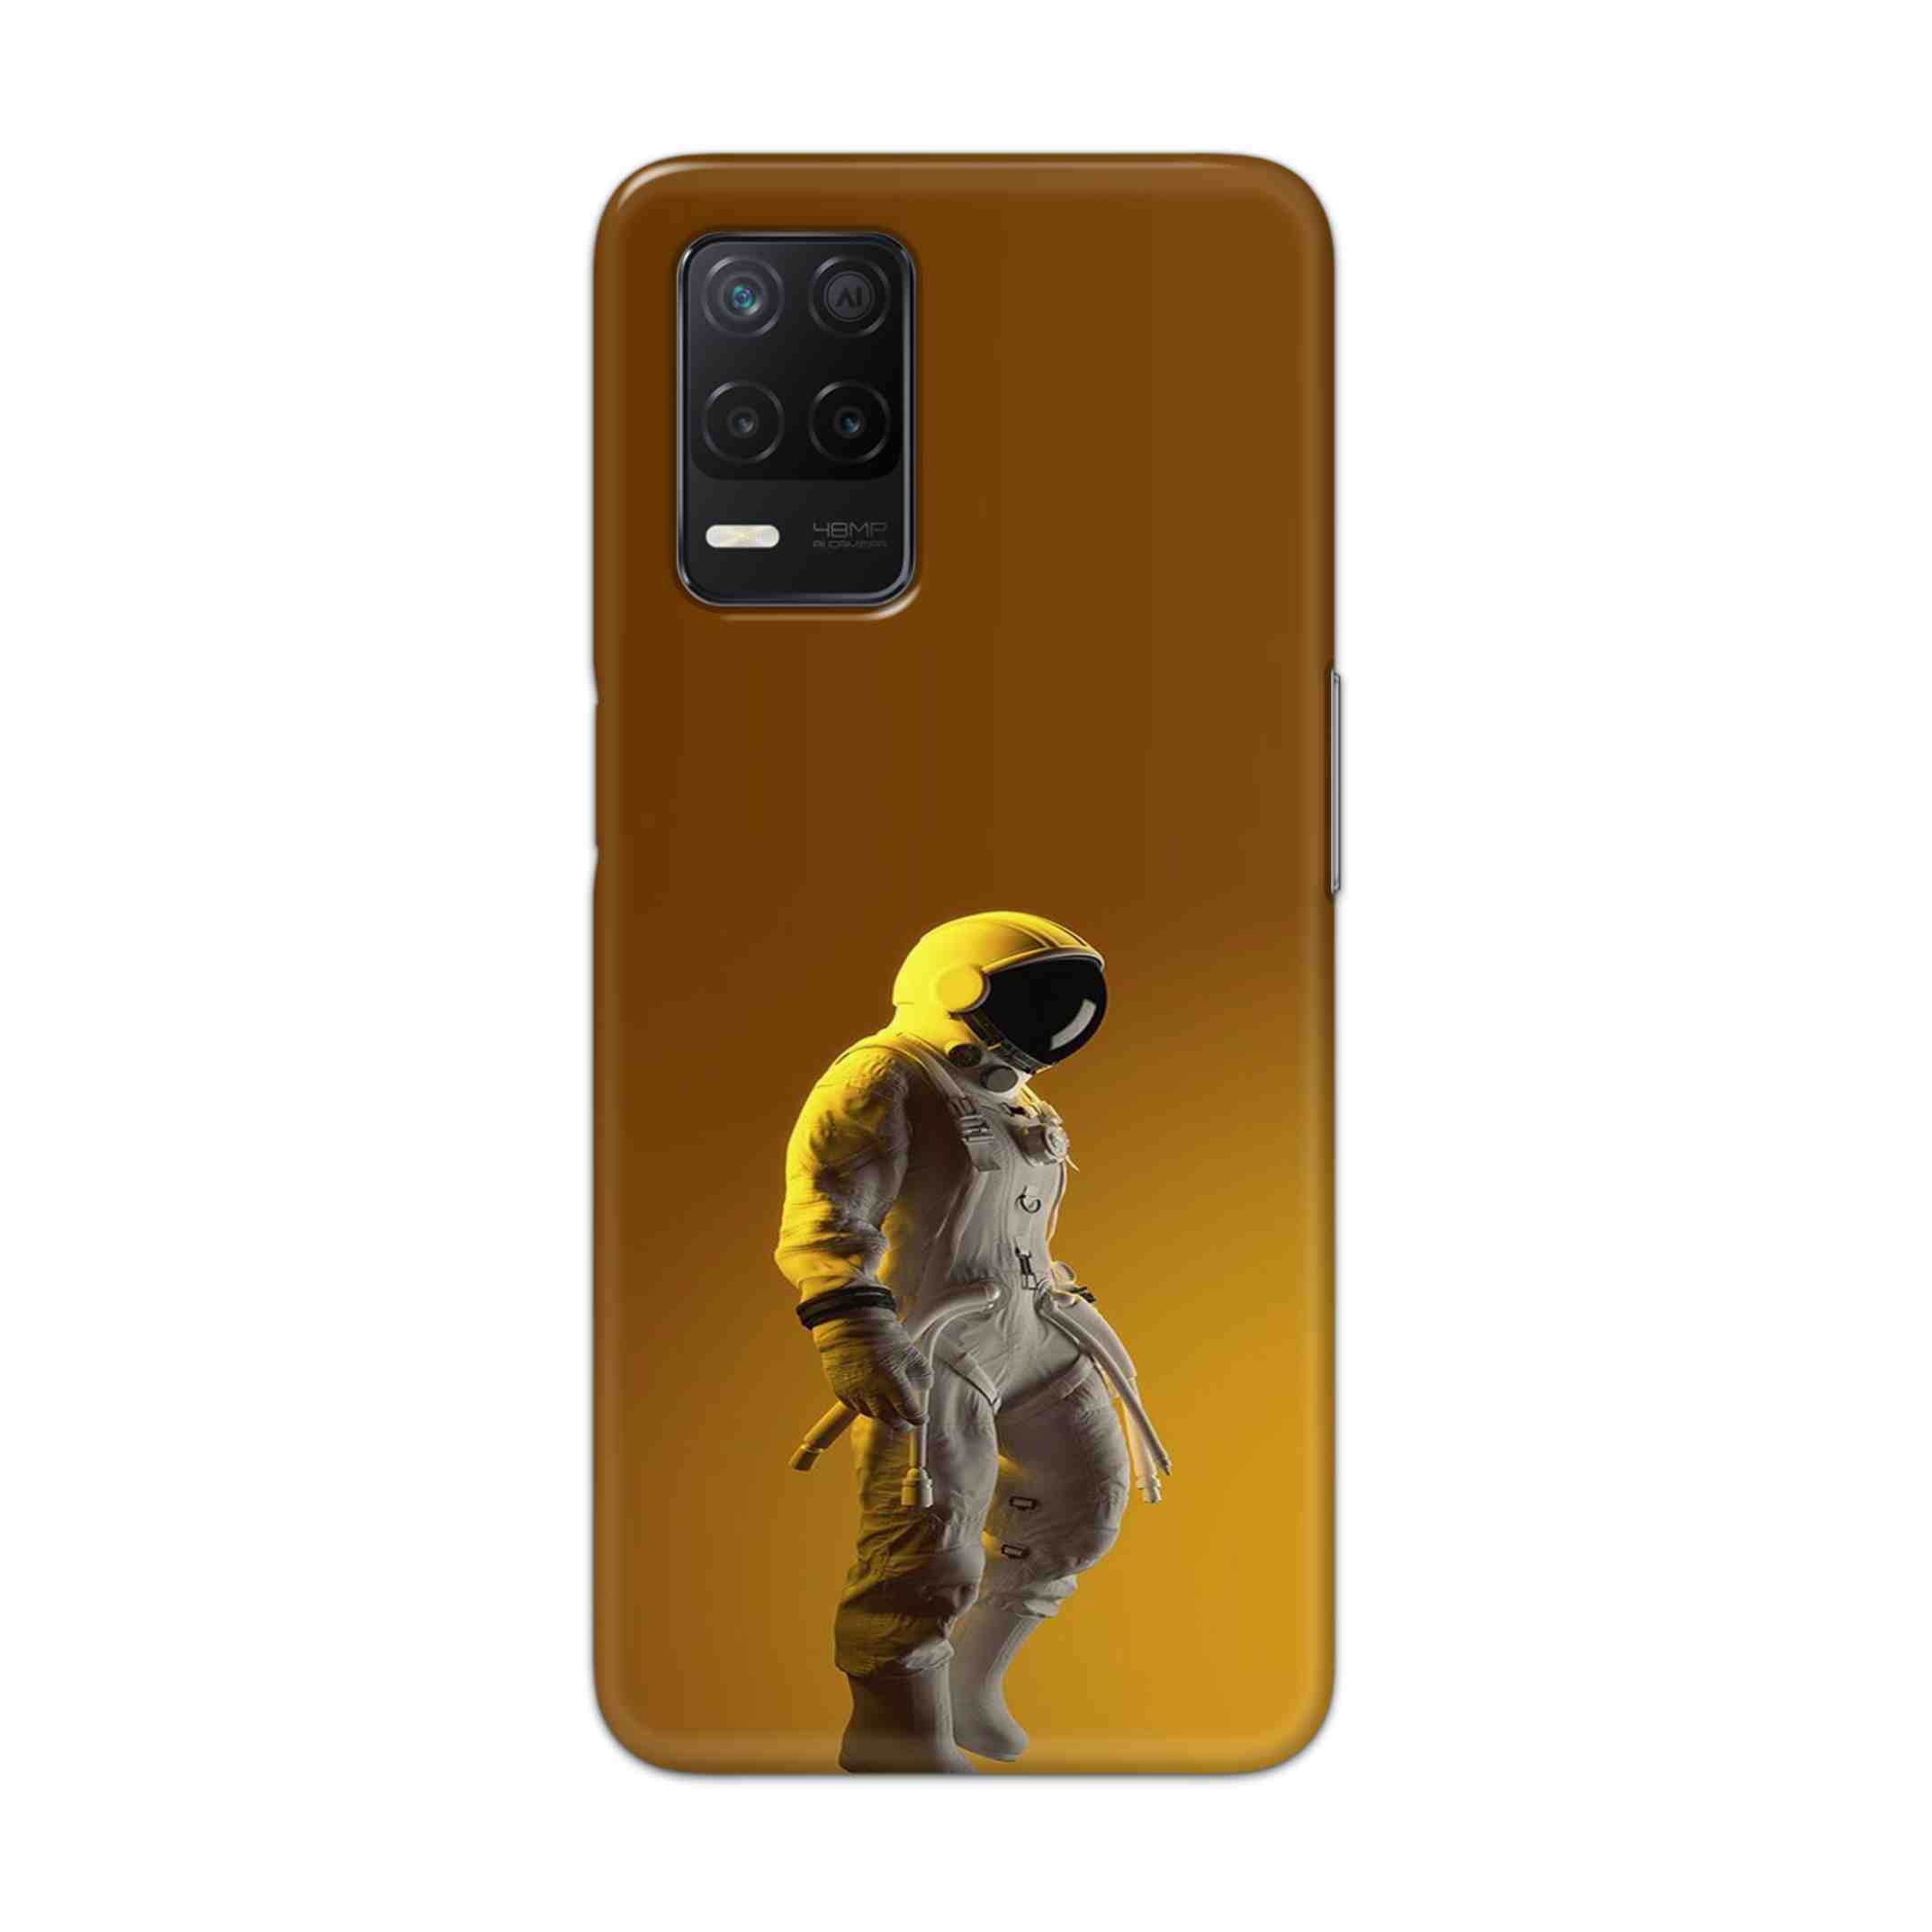 Buy Yellow Astronaut Hard Back Mobile Phone Case Cover For Realme Narzo 30 5G Online